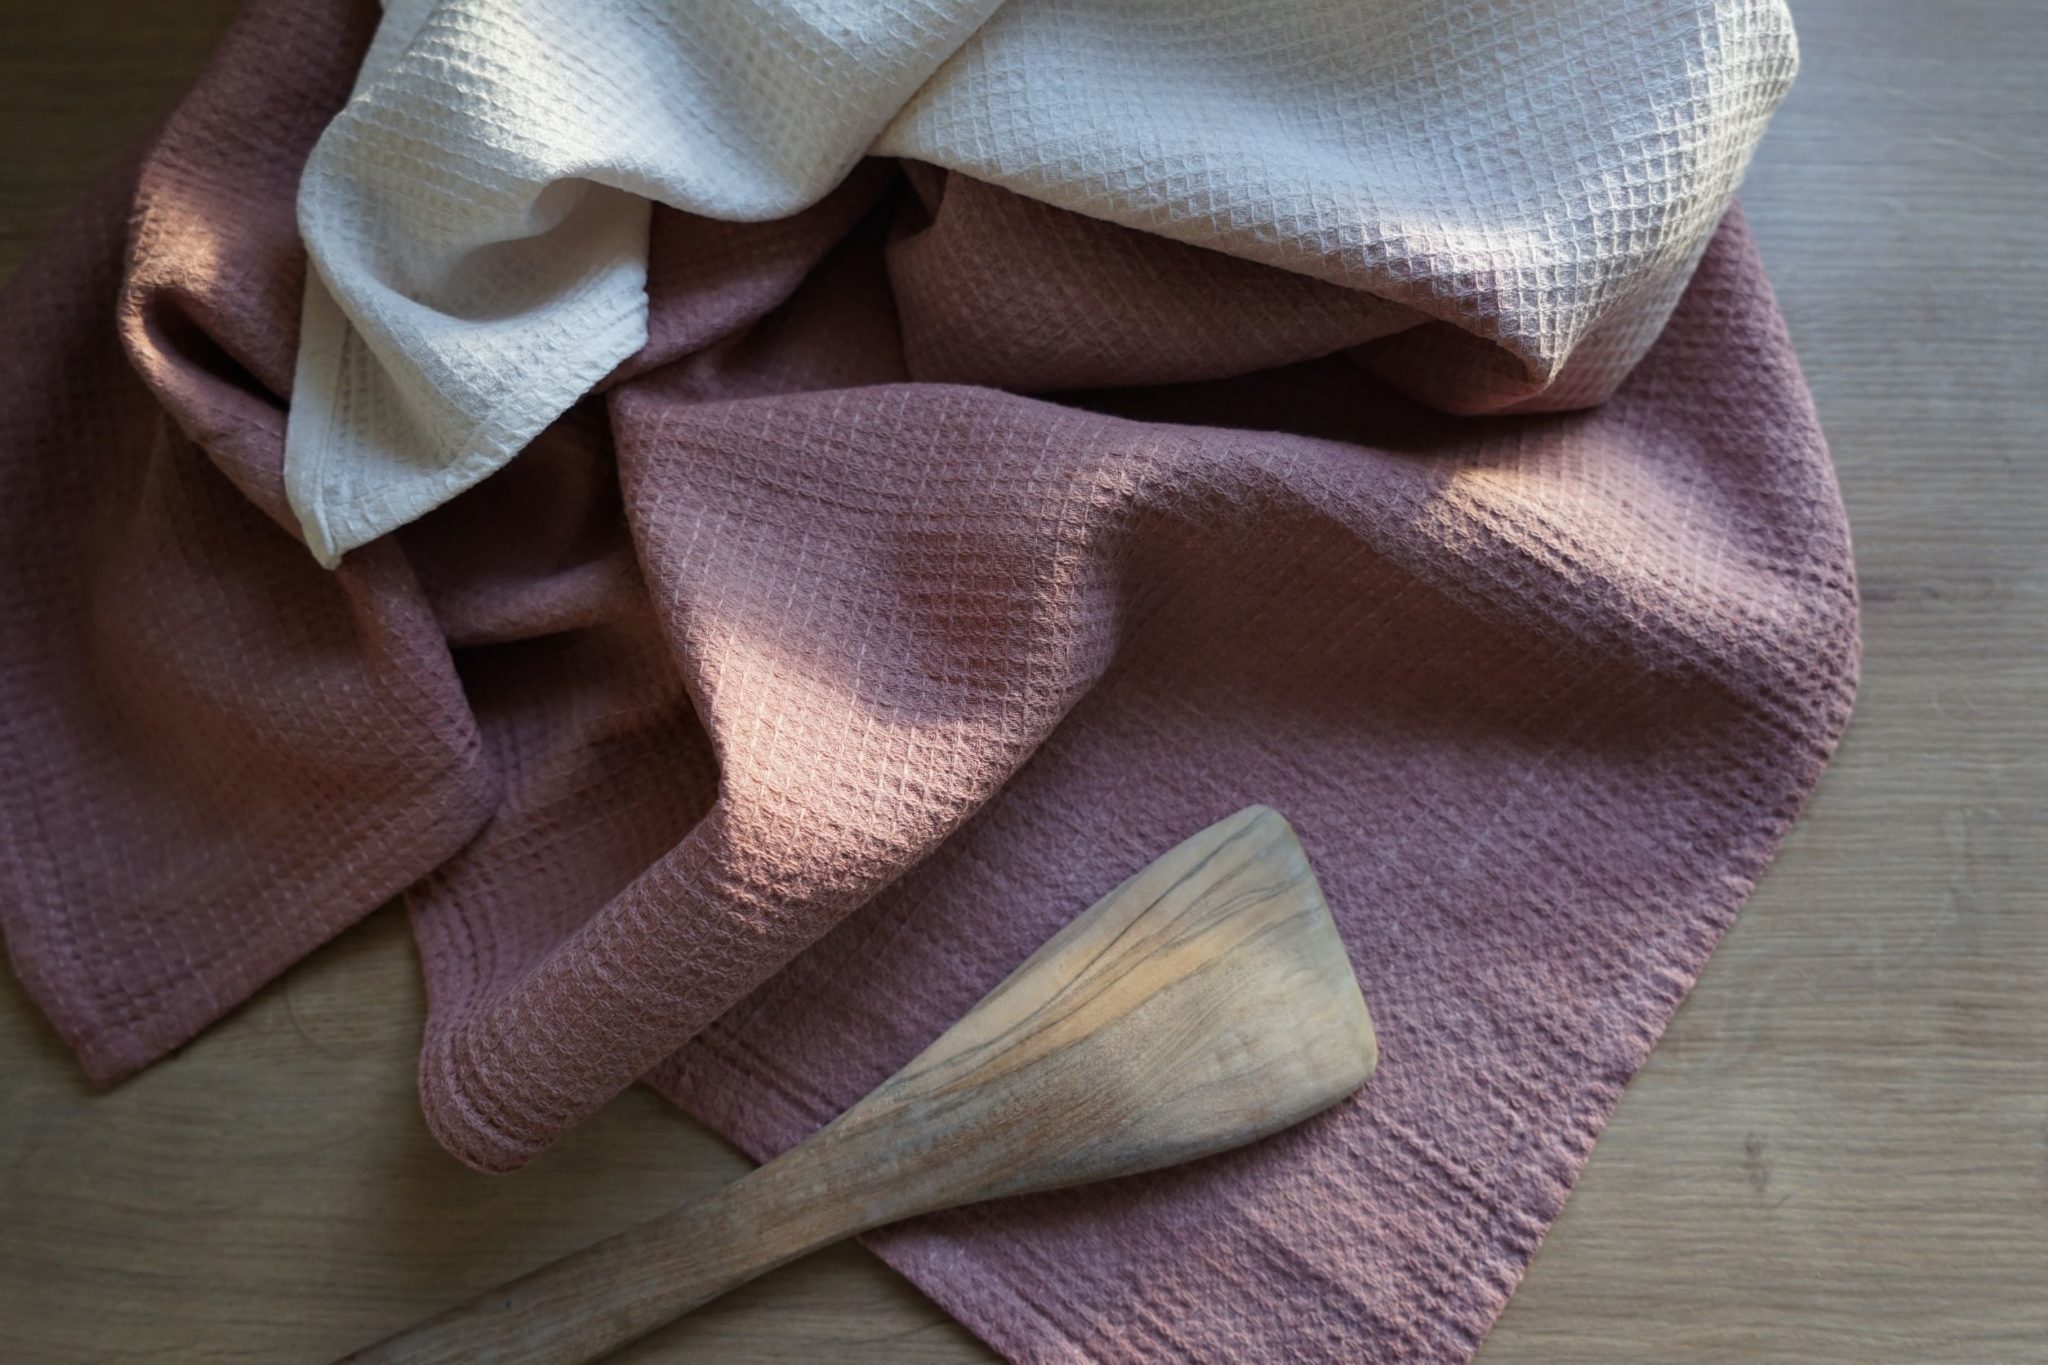 Plant Dyed Organic Cotton dish Towel - Sold in 1 or 2 pieces Set